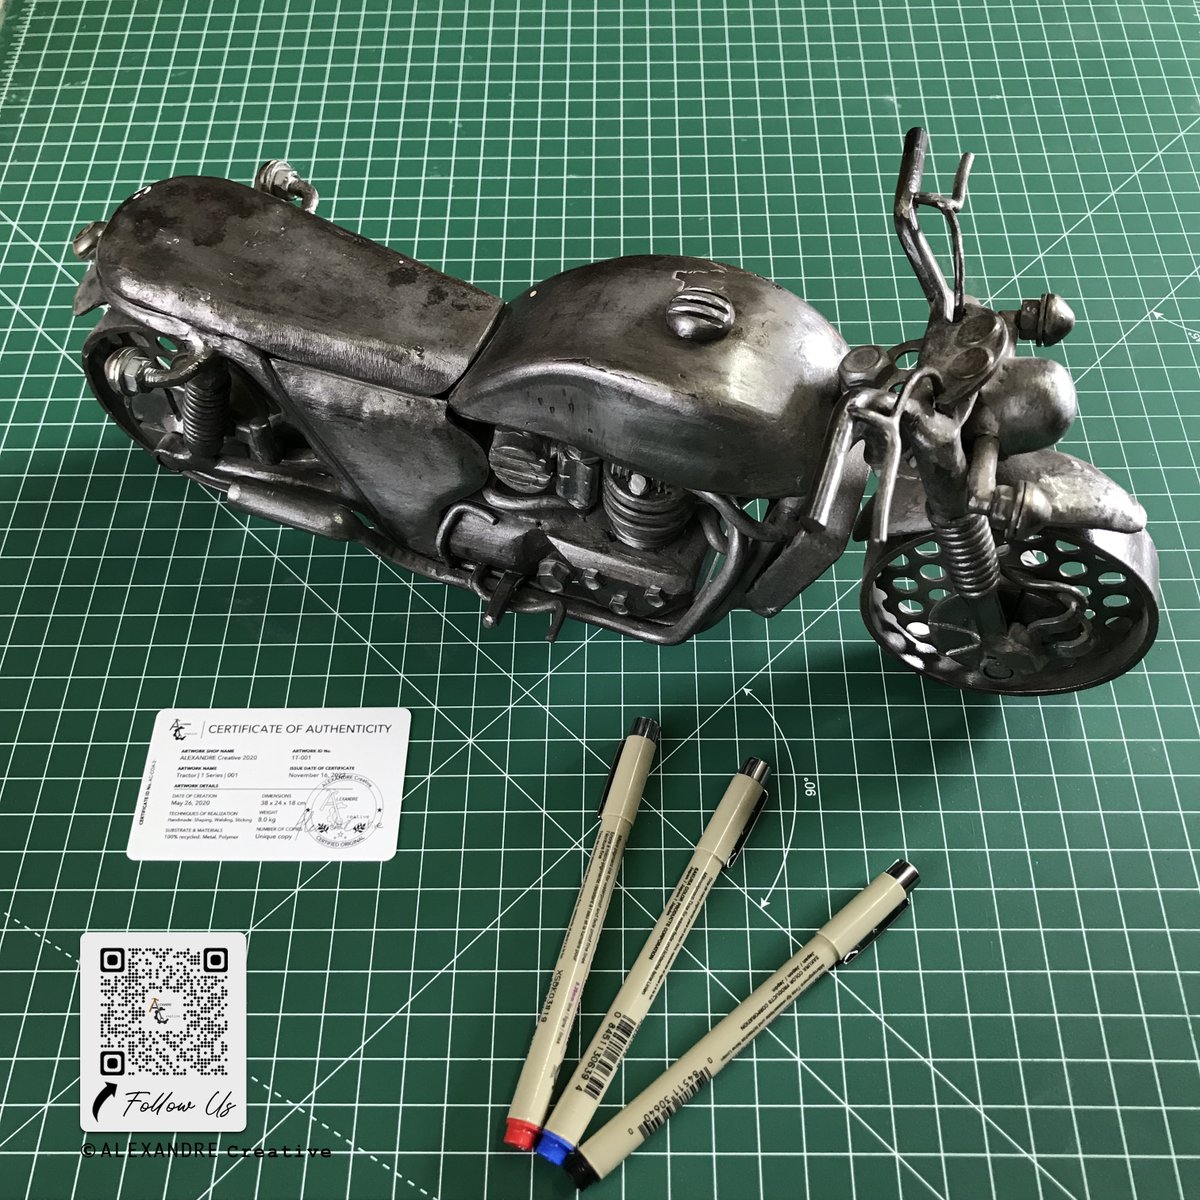 We transform ♻️ your waste into high-end materials and mechanical-inspired creations.      

📷Click here to follow us: linktr.ee/alexandre_crea…

#ClassicMotorcycles #motorcycles #art #artwork #engine #artmetal #moto #scalemodel #bikelife #metalart #Engineering